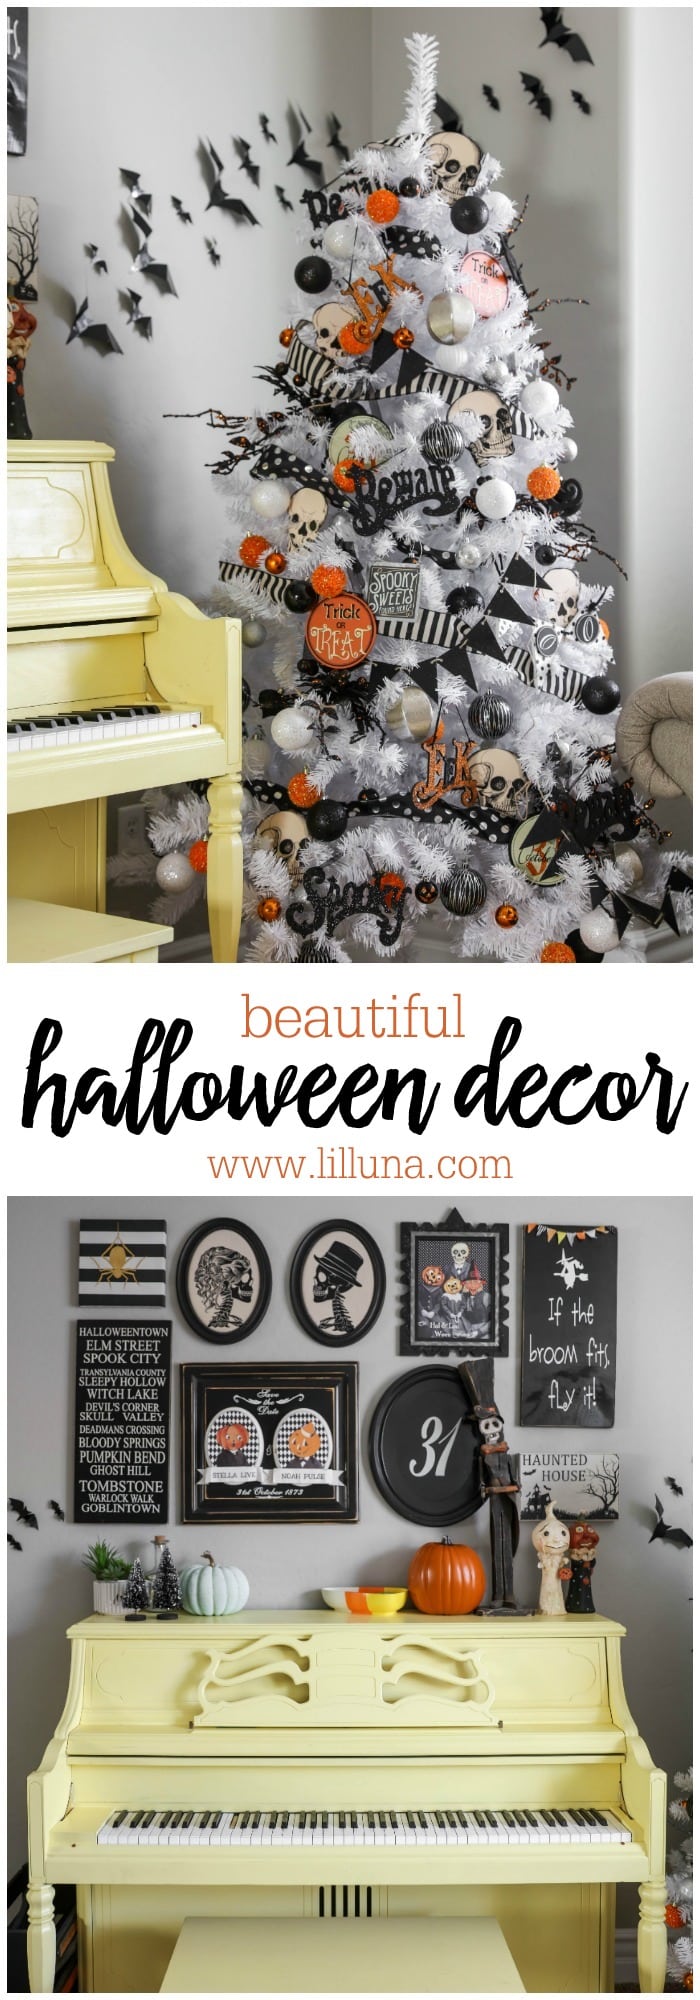 Beautiful Halloween decor - from Halloween trees to gallery walls, these ideas are awesome!